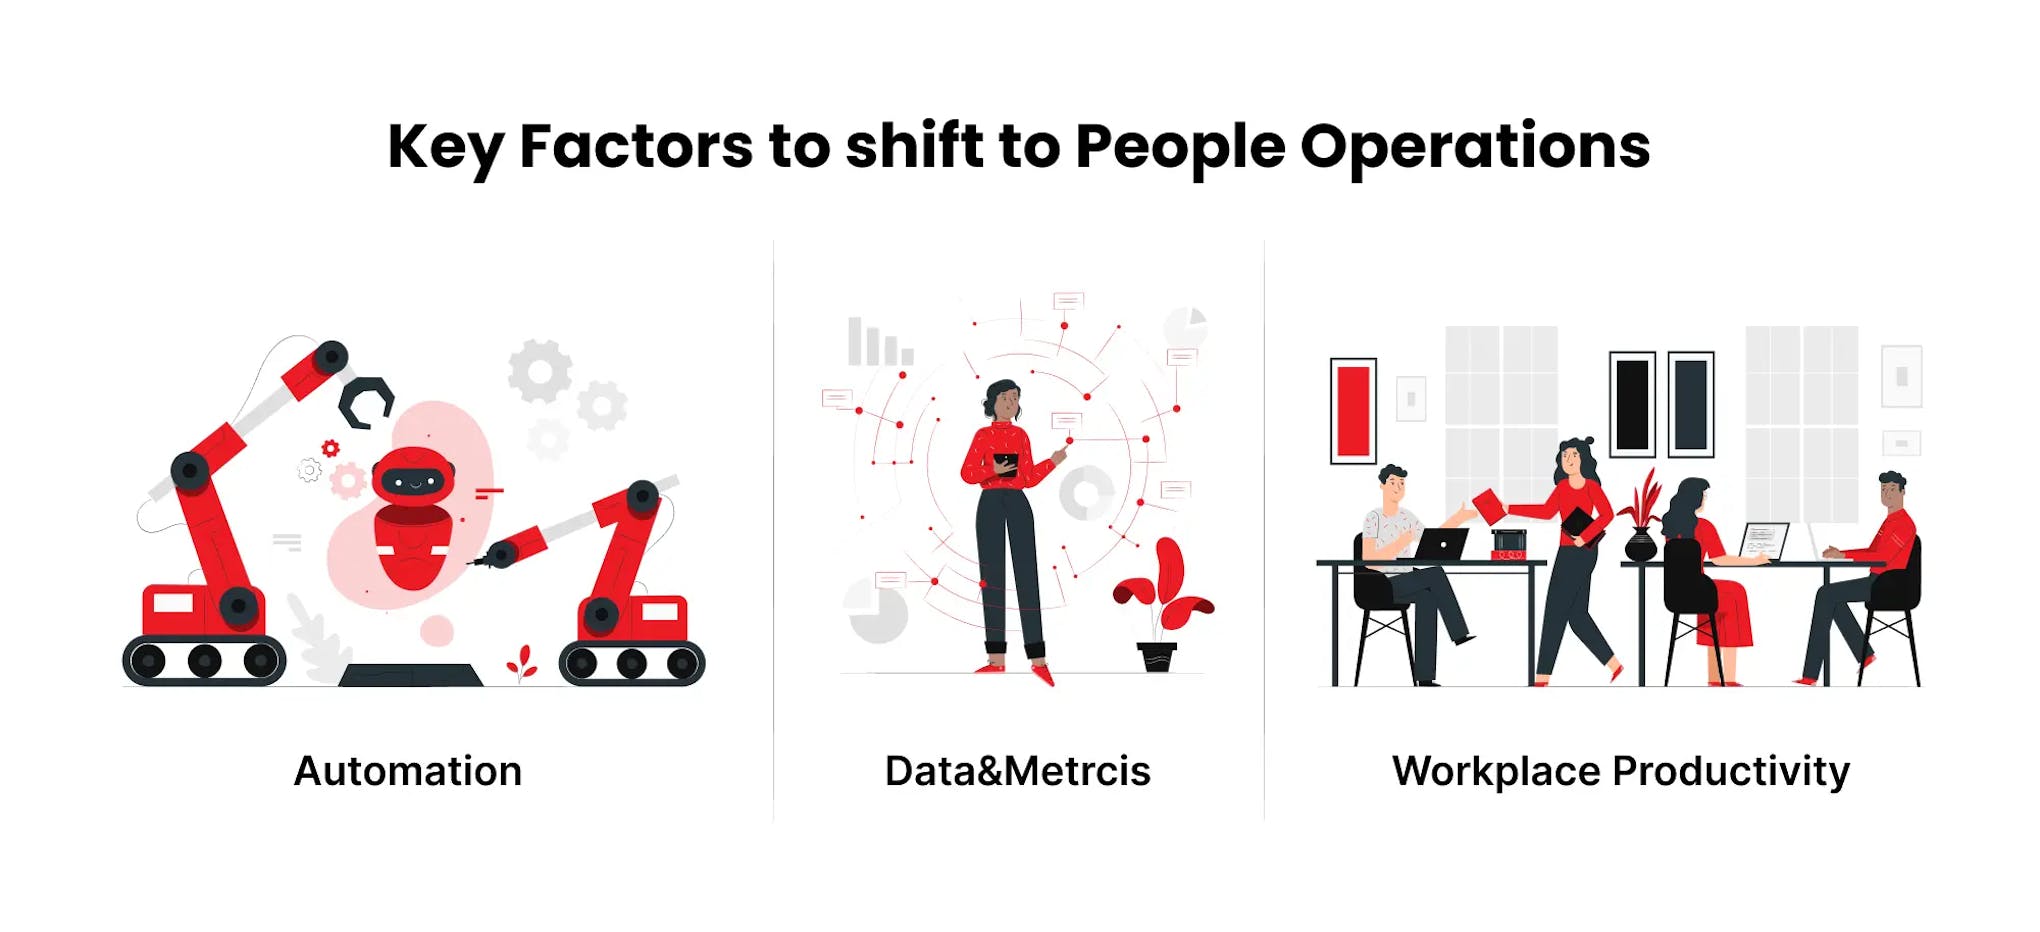 Key Factors to shift to People Operations